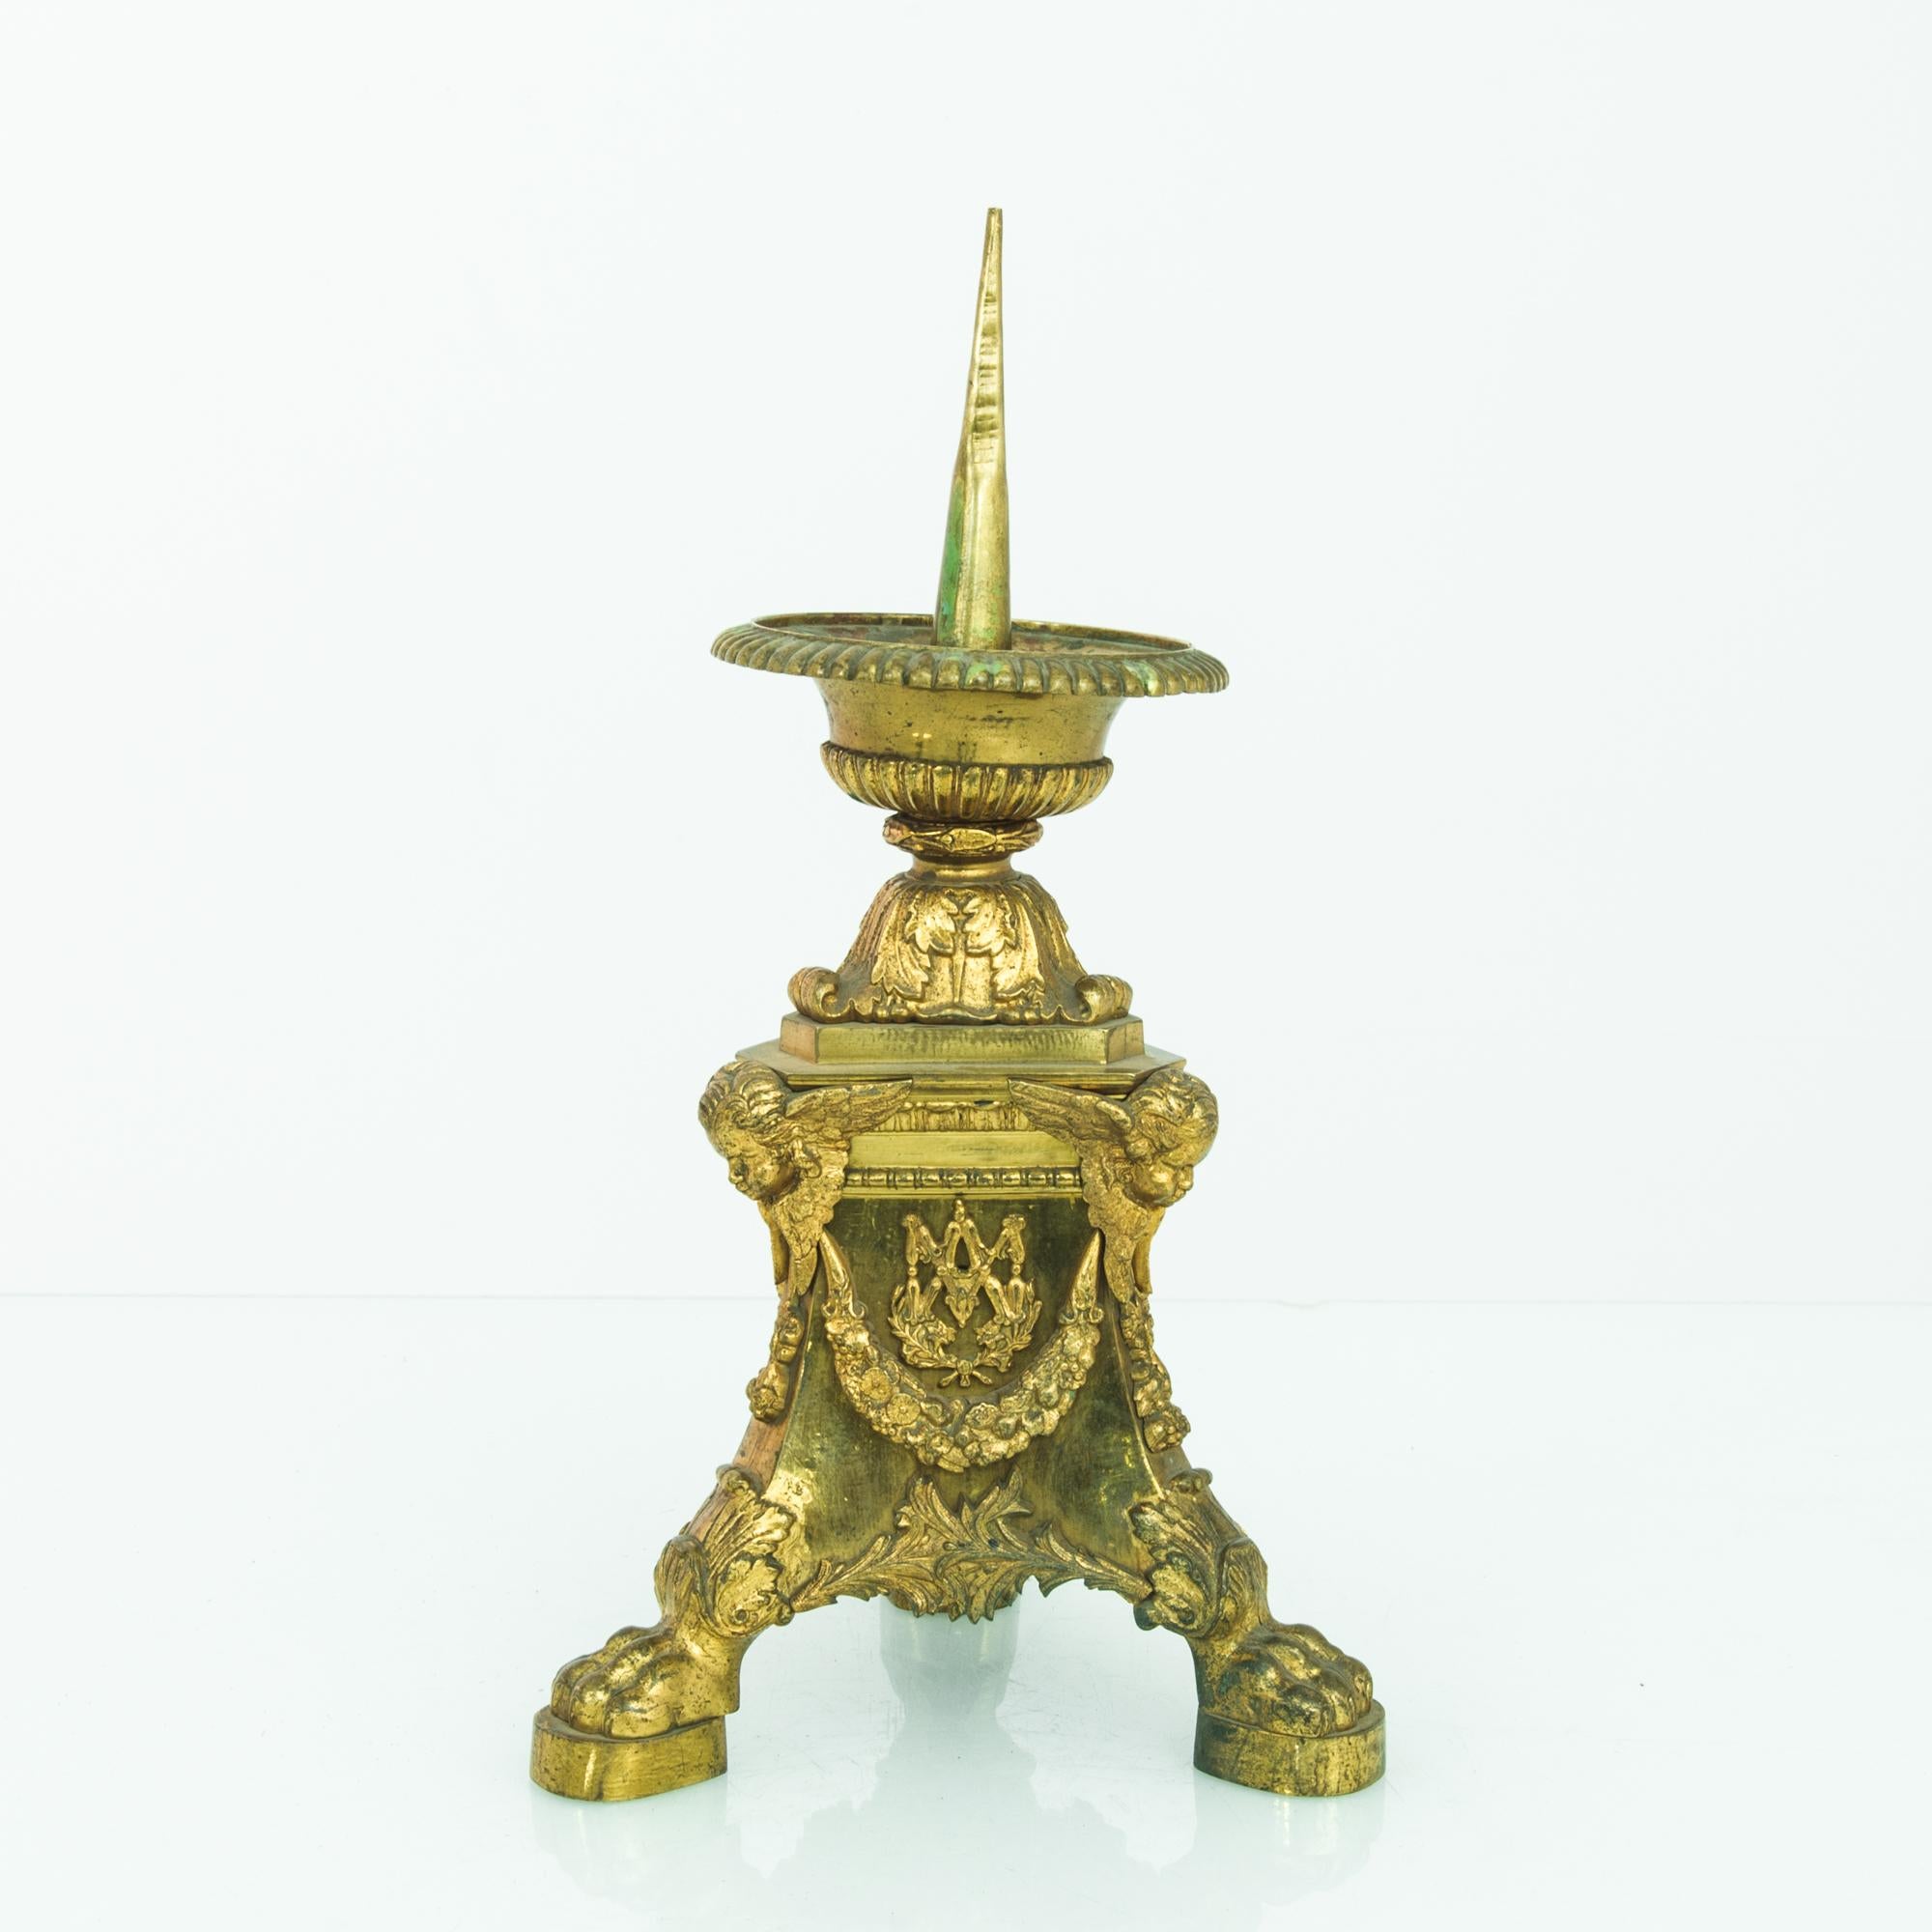 A liturgical candlestick from 1890s France, made of ornate brass. The base is heavily adorned with claw feet, festoons, leafy flourishes and winged cherub heads. Above, a long spike provides a support for a large candle. The bright tone of the brass